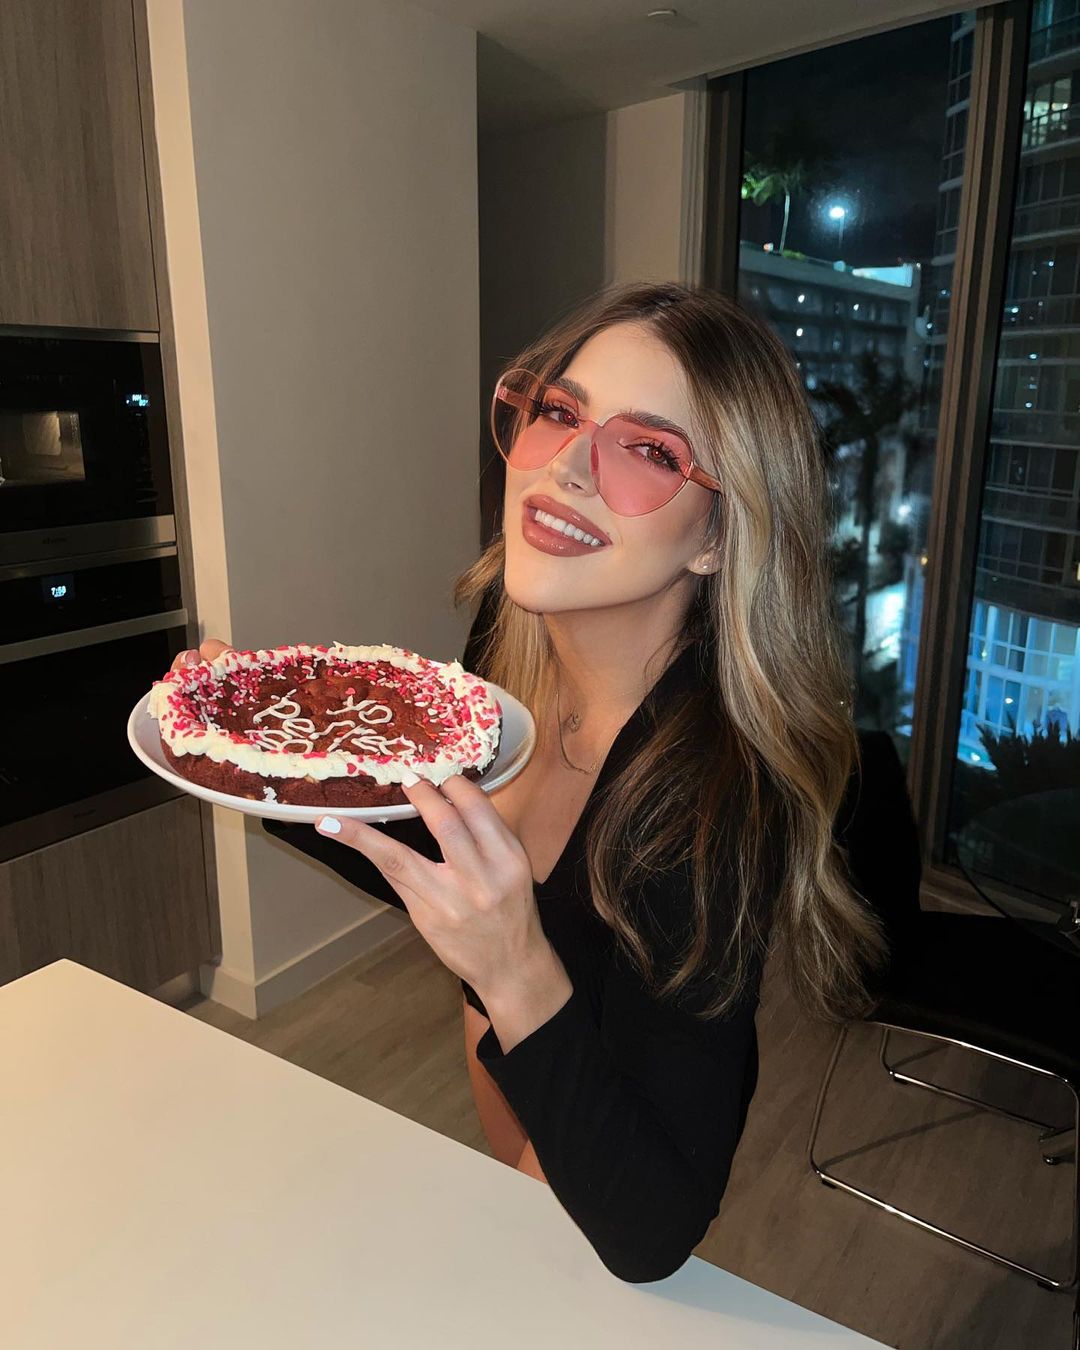 Giselle Azueta serving pizza for her billionaire client on the yacht.